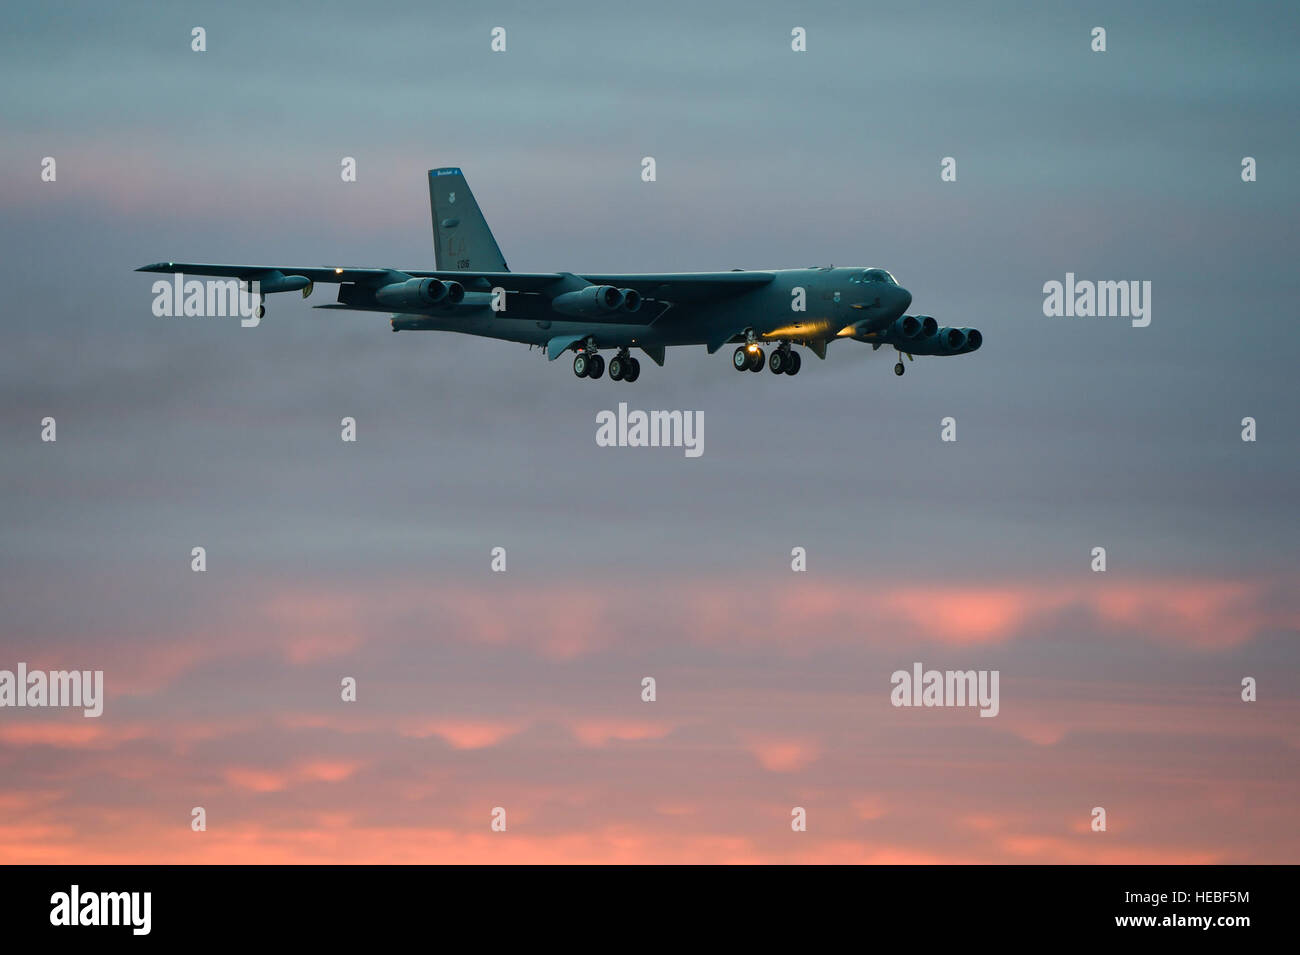 A B-52 Stratofortress from the 2nd Bomb Wing participates in Vigilant Shield 15 Oct. 24, 2014, at 5 Wing Goose Bay, Newfoundland and Labrador, Canada. The Vigilant Shield field training exercise is a bi-national North American Aerospace Defense Command exercise that provides realistic training and practice for American and Canadian forces. NORAD ensures U.S. and Canadian air sovereignty through a network of alert fighters, tankers, airborne early warning aircraft, and ground-based air defense assets cued by interagency and defense surveillance radars. (U.S. Air Force photo/Senior Airman Justin Stock Photo